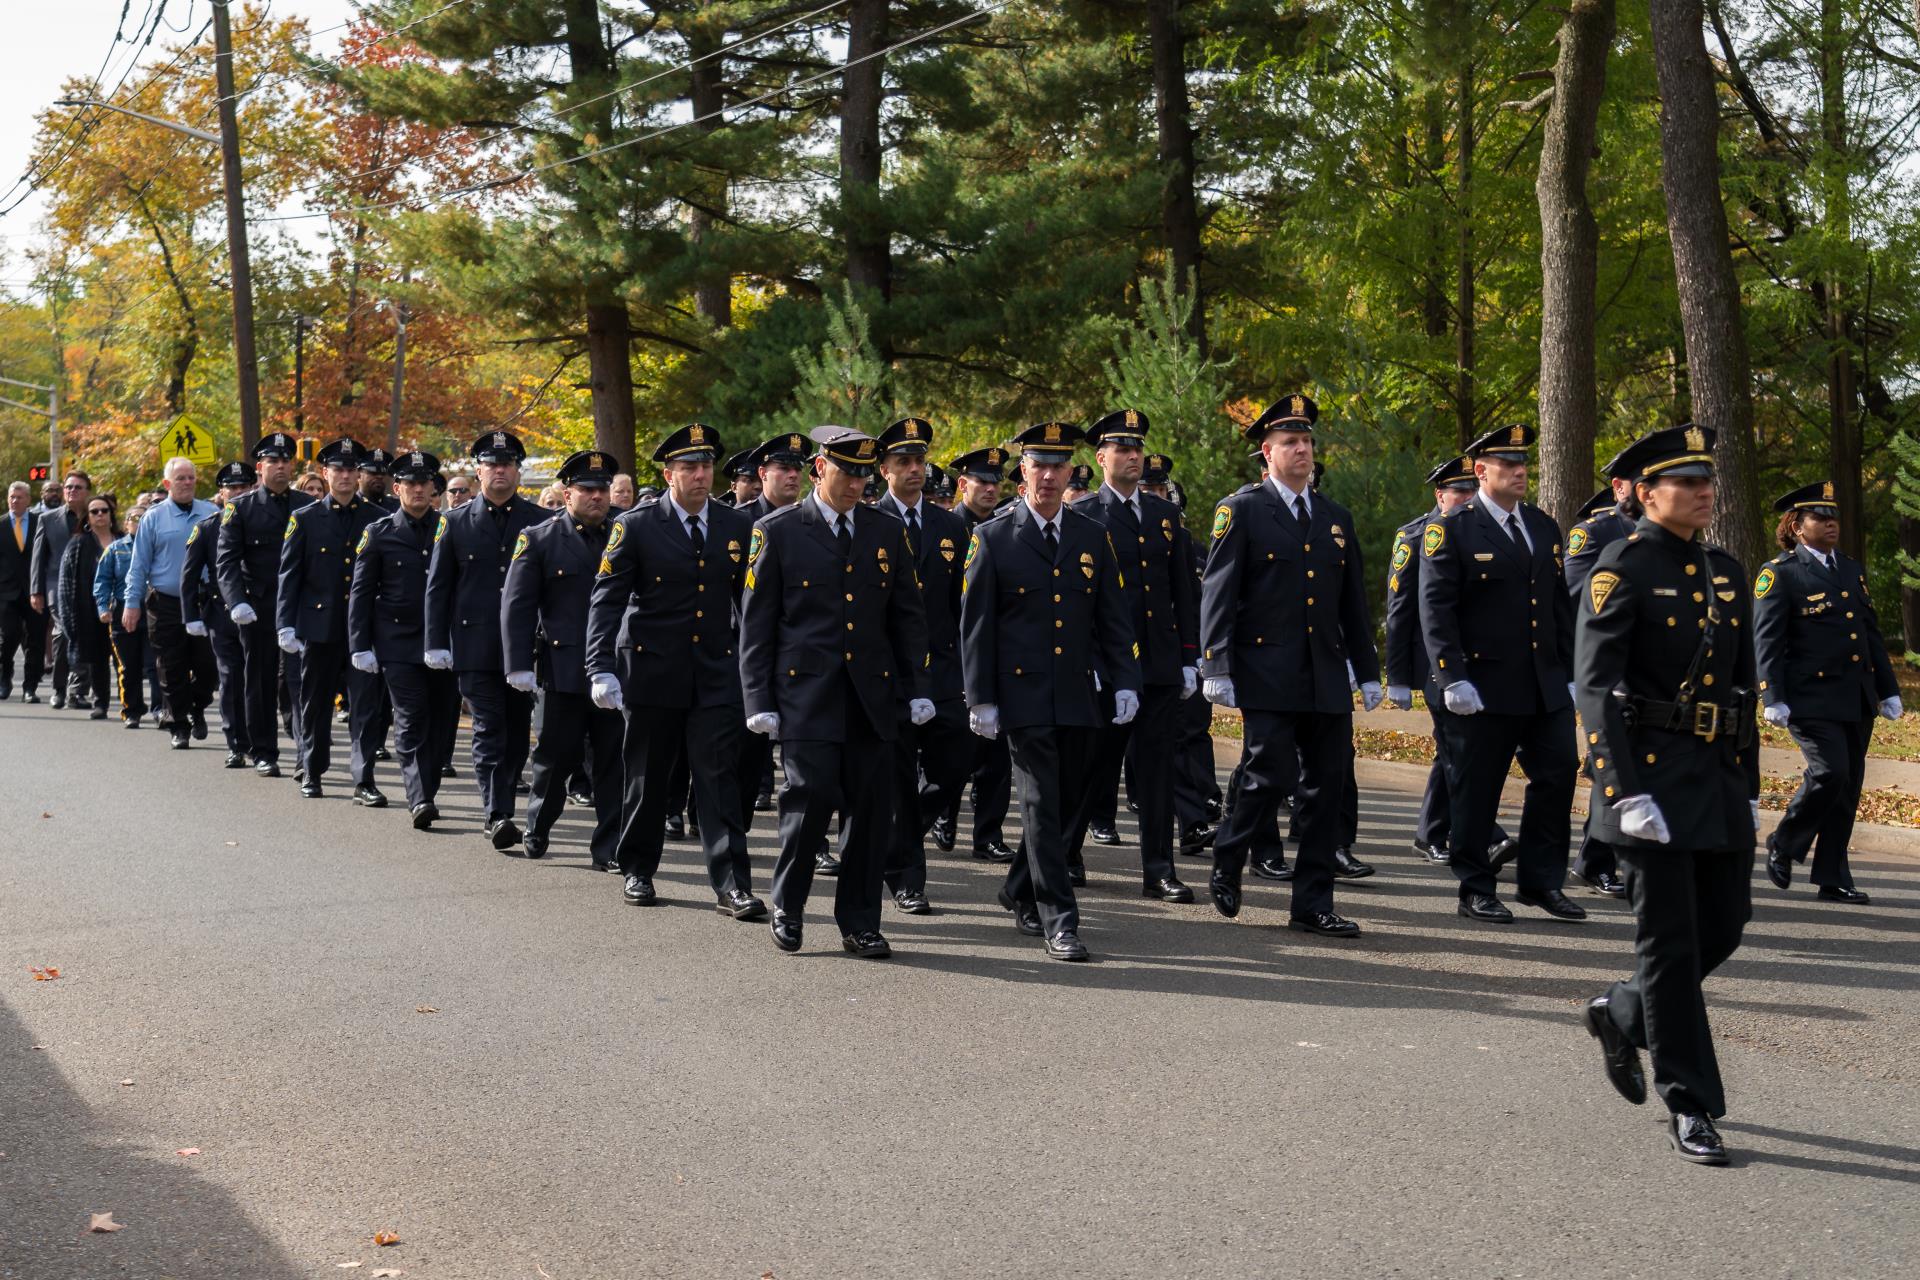 Image of walking procession at Chief DeVaul's funeral.